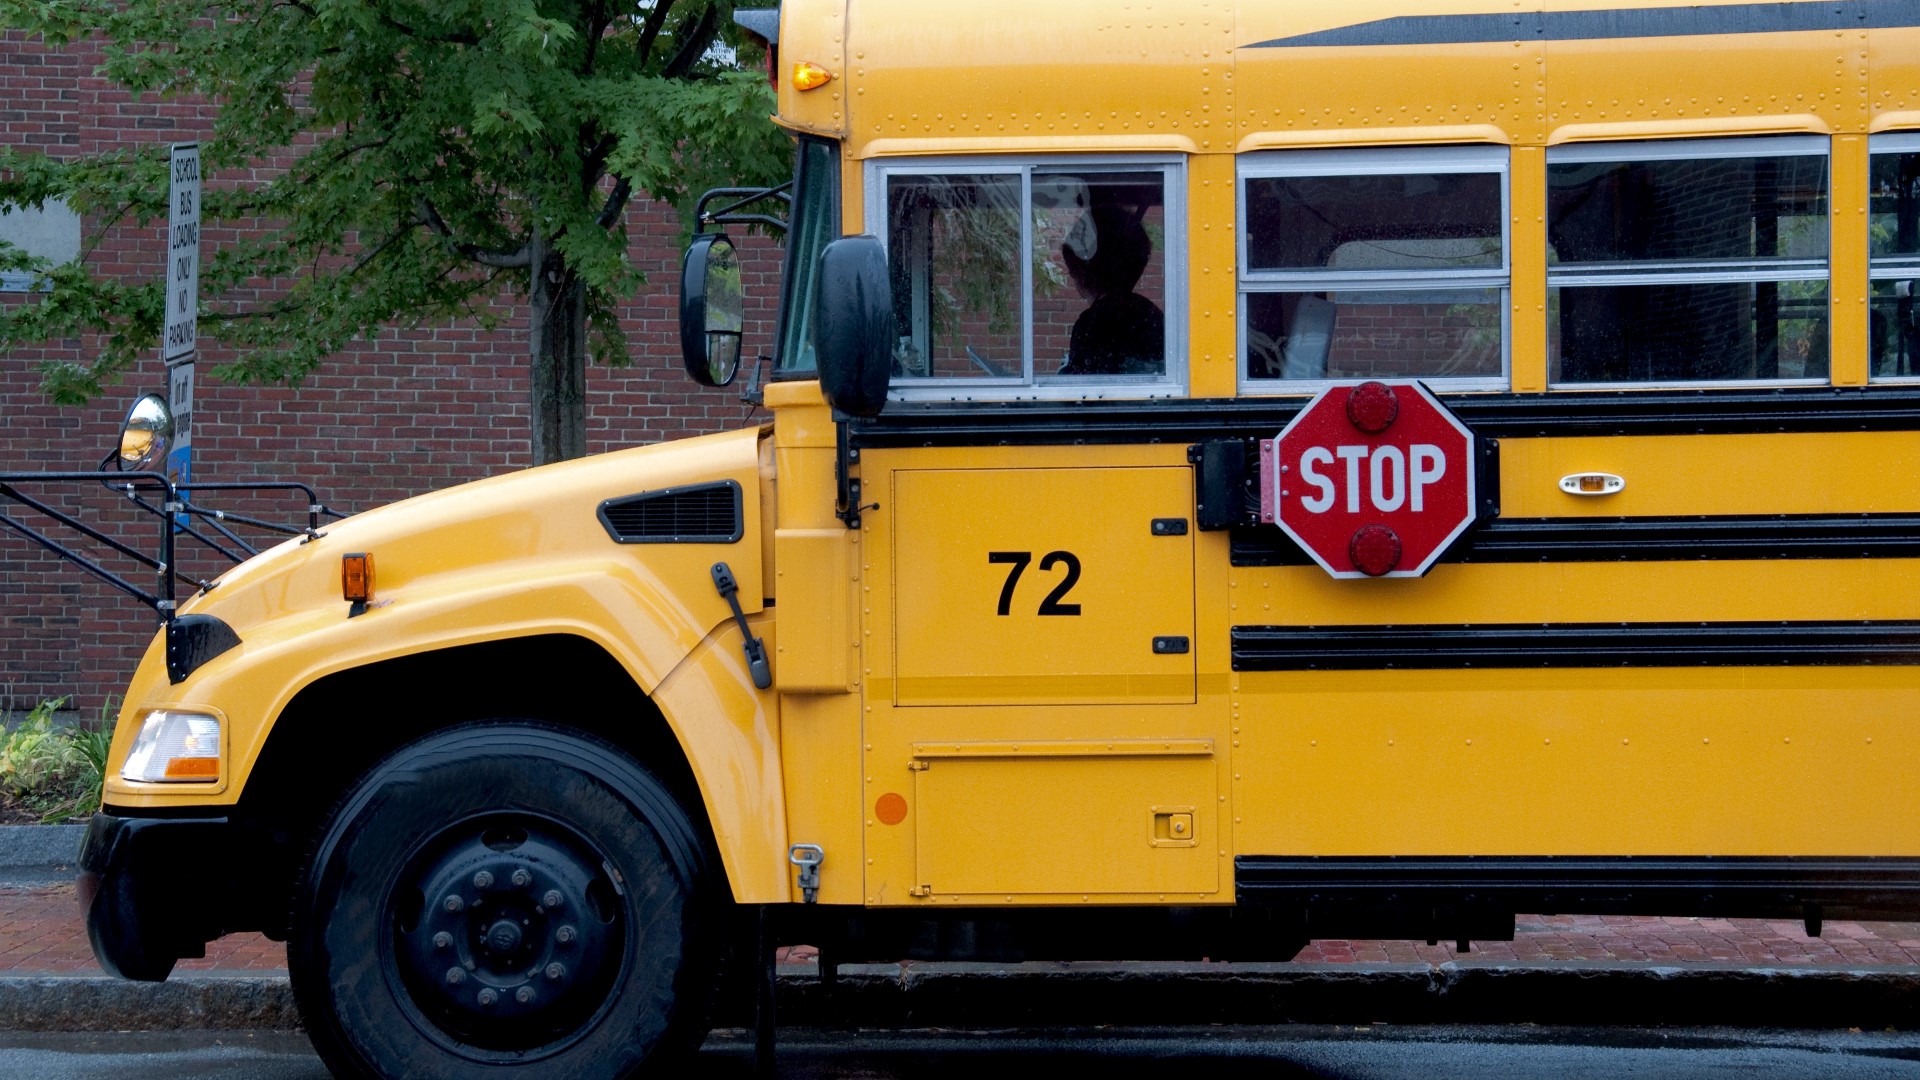 Starting in November, Charlotte-Mecklenburg Schools bus drivers will get a pay raise. Here's how it compares to other districts in the Carolinas.